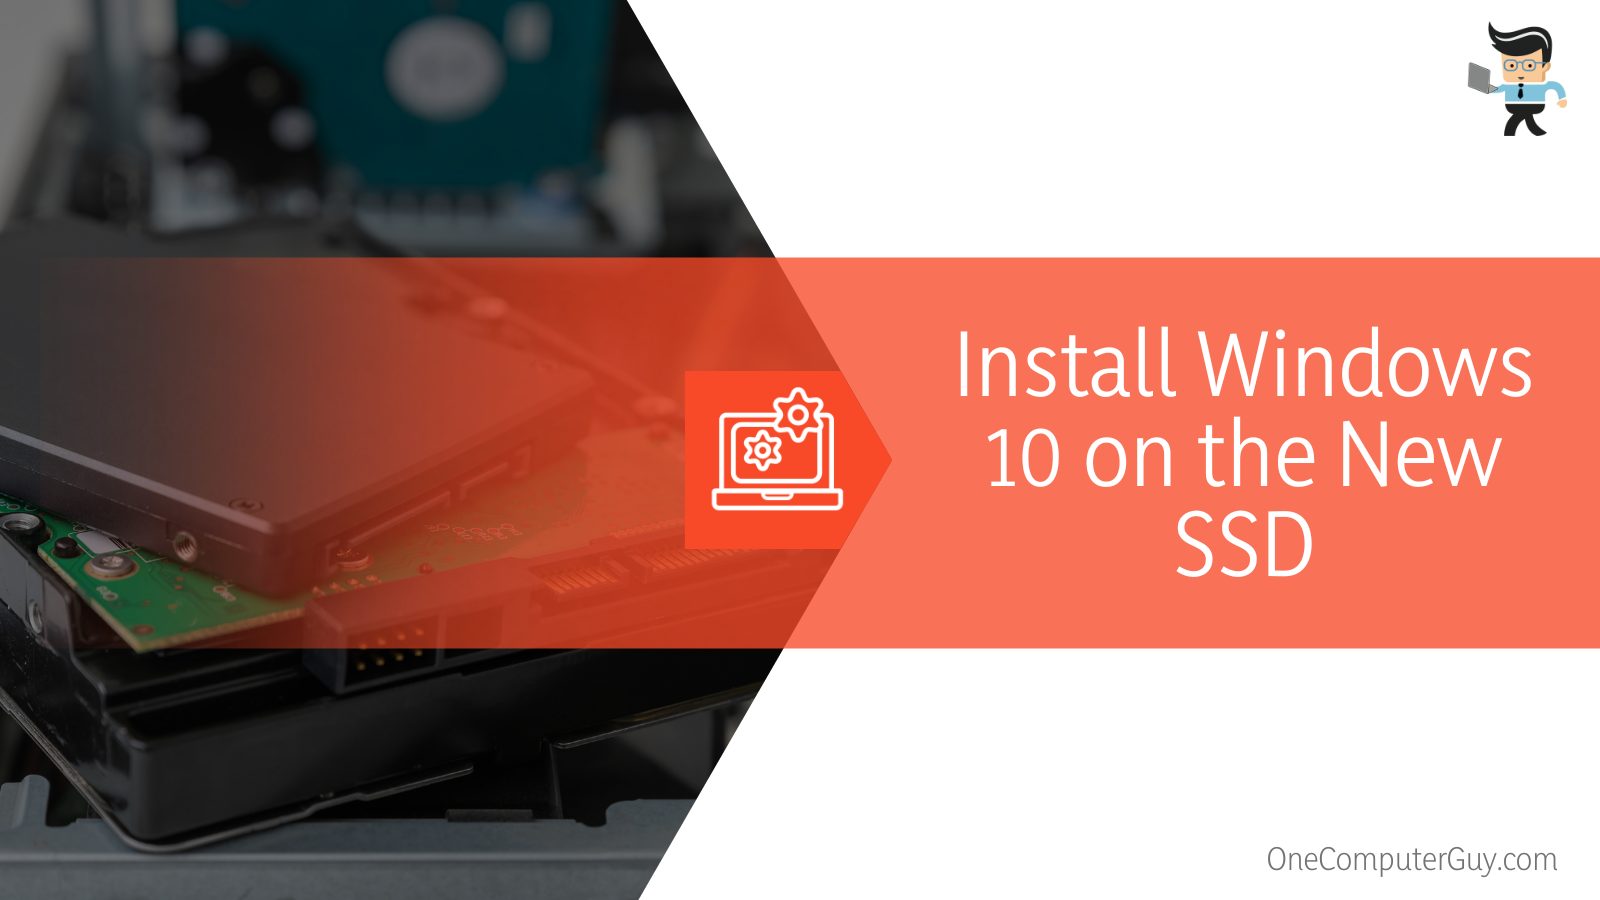 Install Windows 10 on the New SSD